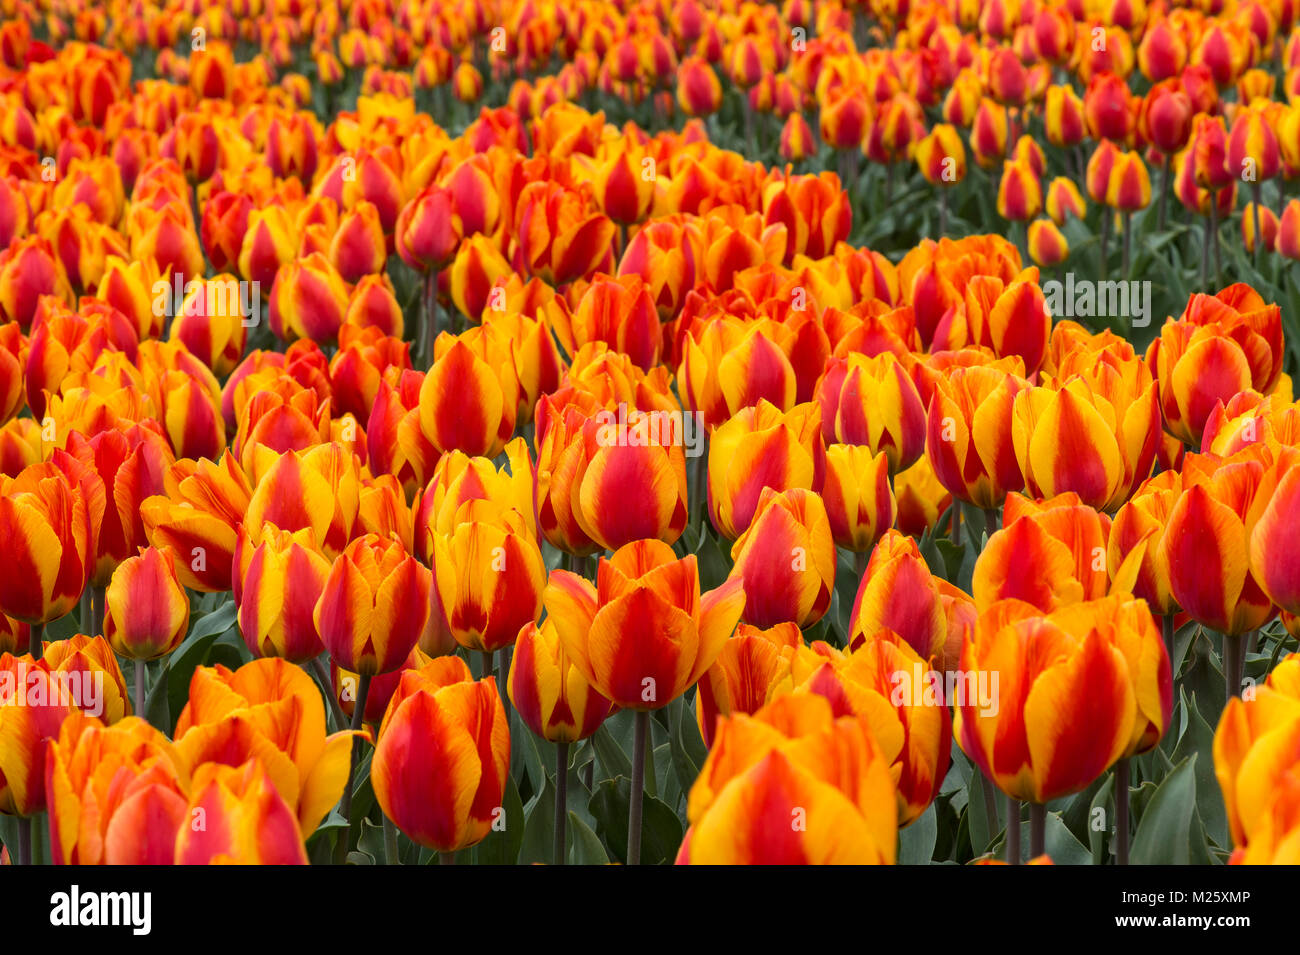 Blooming tulip field of orange tulips in the area of Bollenstreek, known for the production of spring flower bulbs,  Netherlands Stock Photo